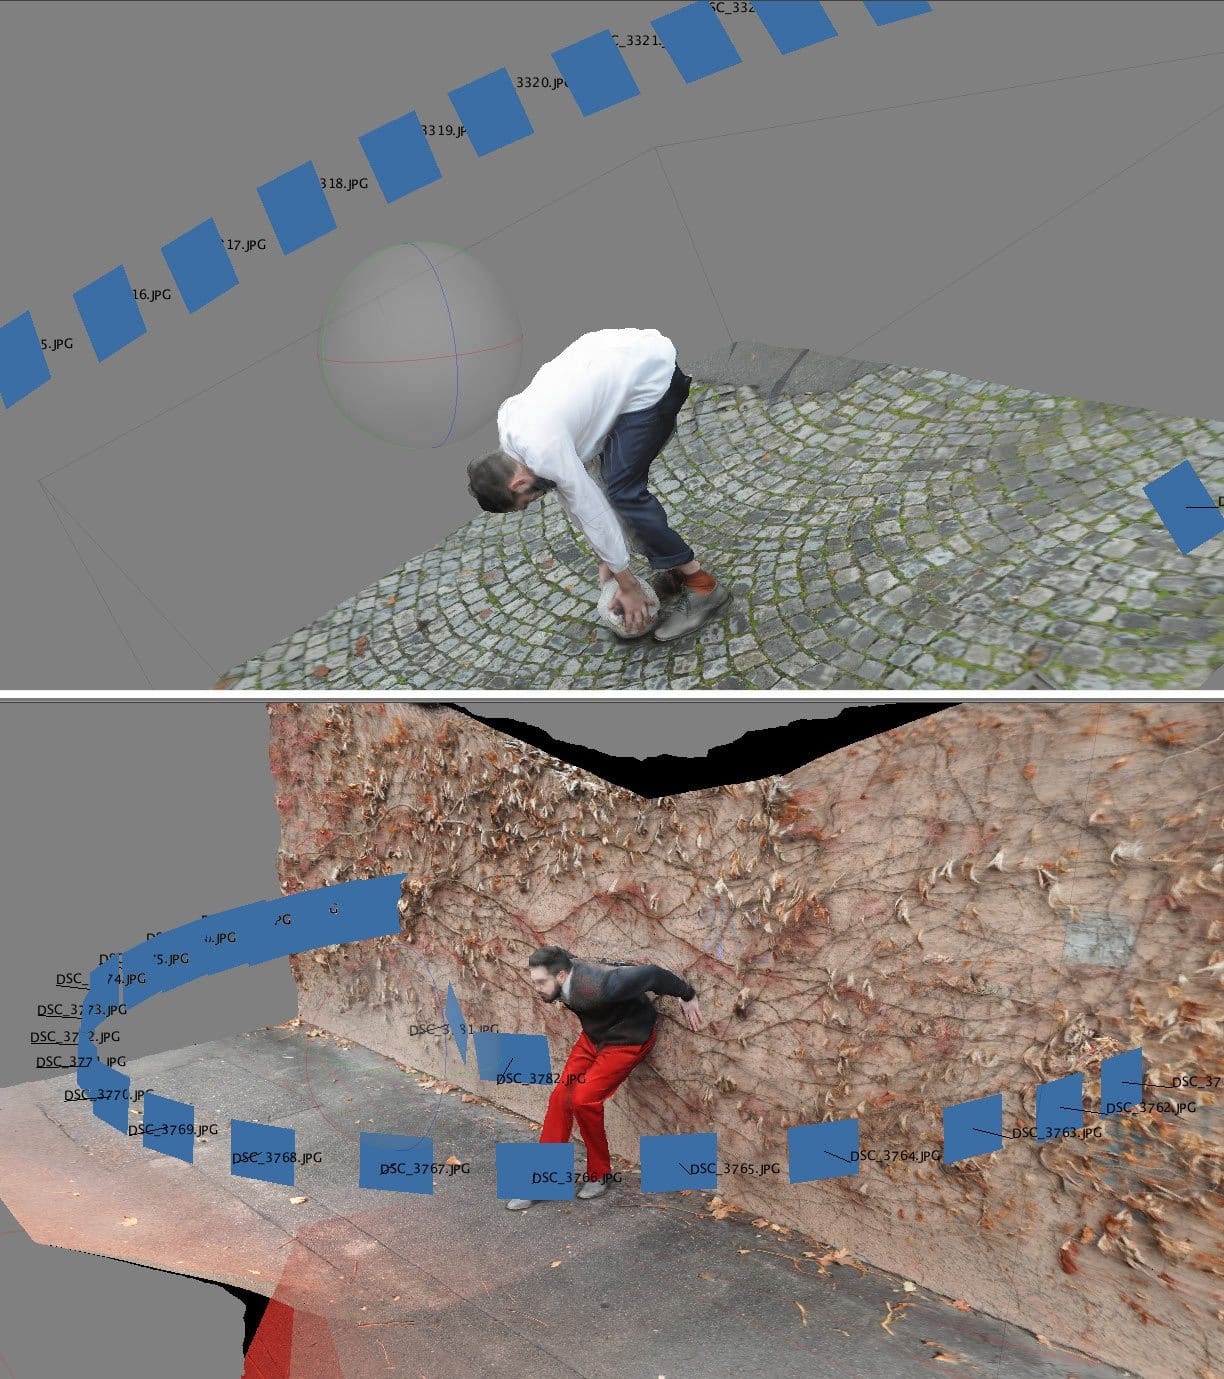 The photogrammetry build from PhotoScan shows the positions where the stills used to produce the 3D model were taken from.